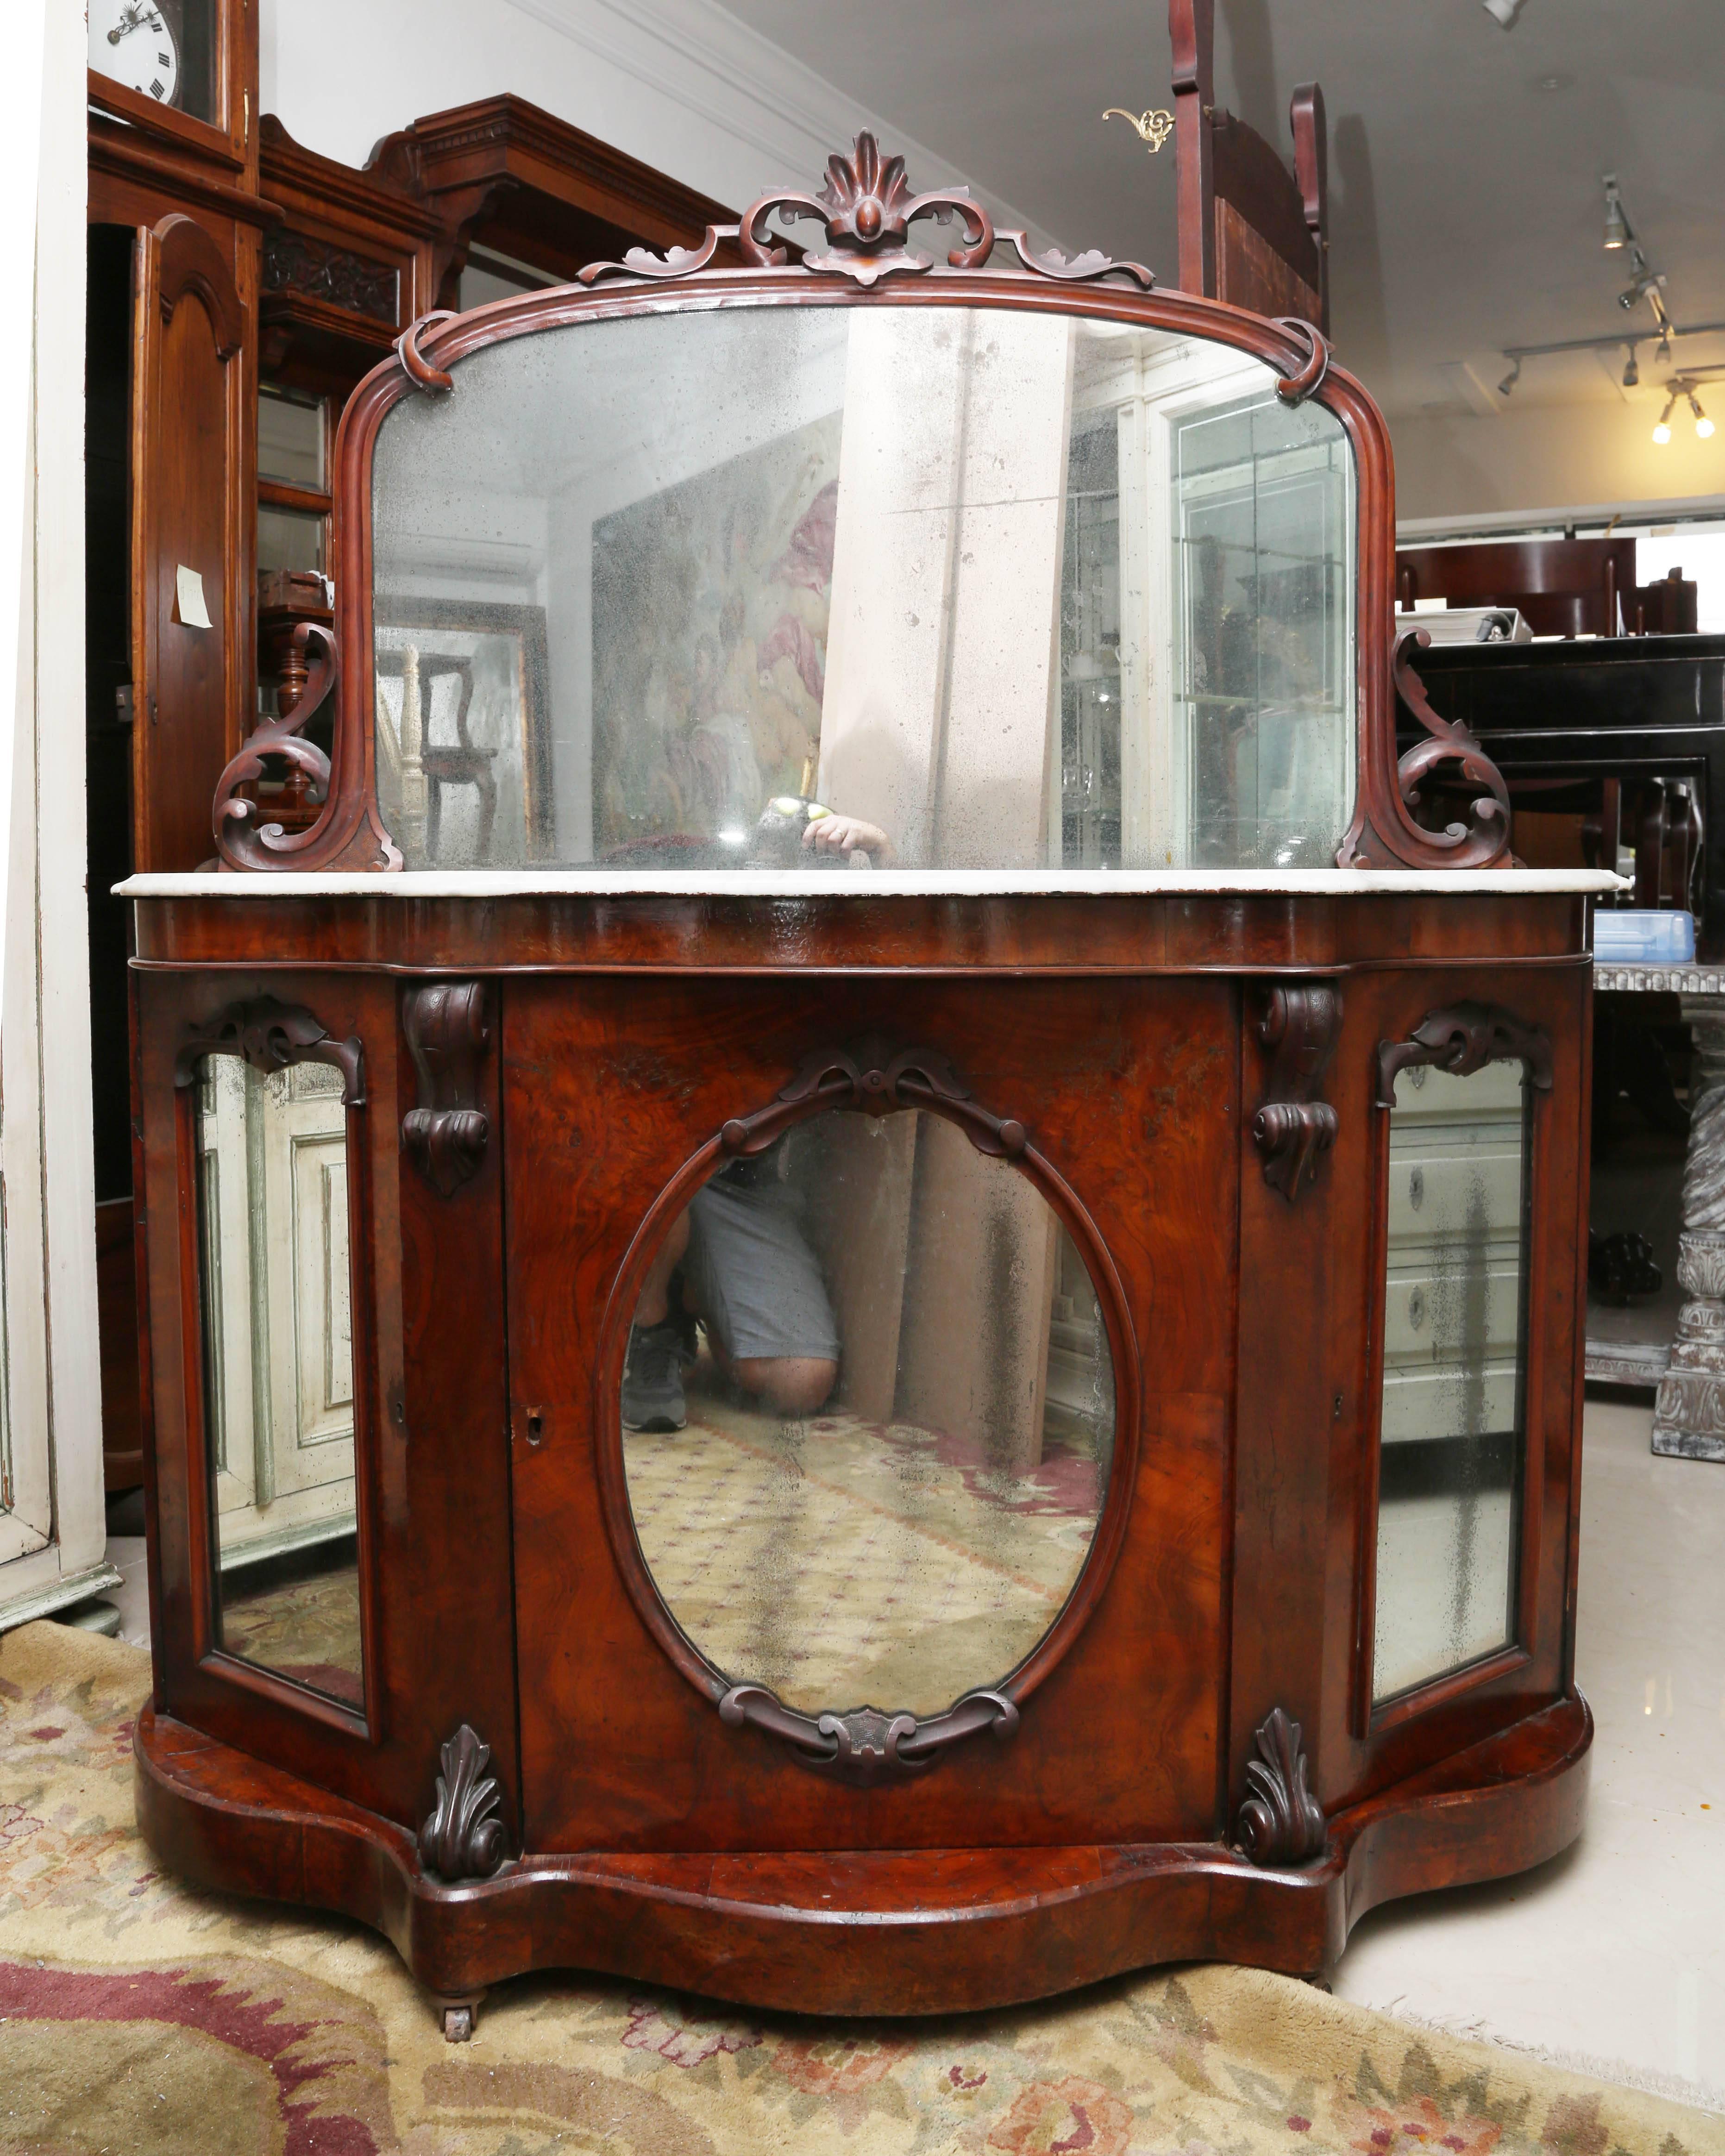 This is a very nice marble top English server which could be used as a bar, console or server.
It burr walnut Victorian with a marble top.
It has the original marble and original patina, all the mirrors are frosted with age.
This would have been